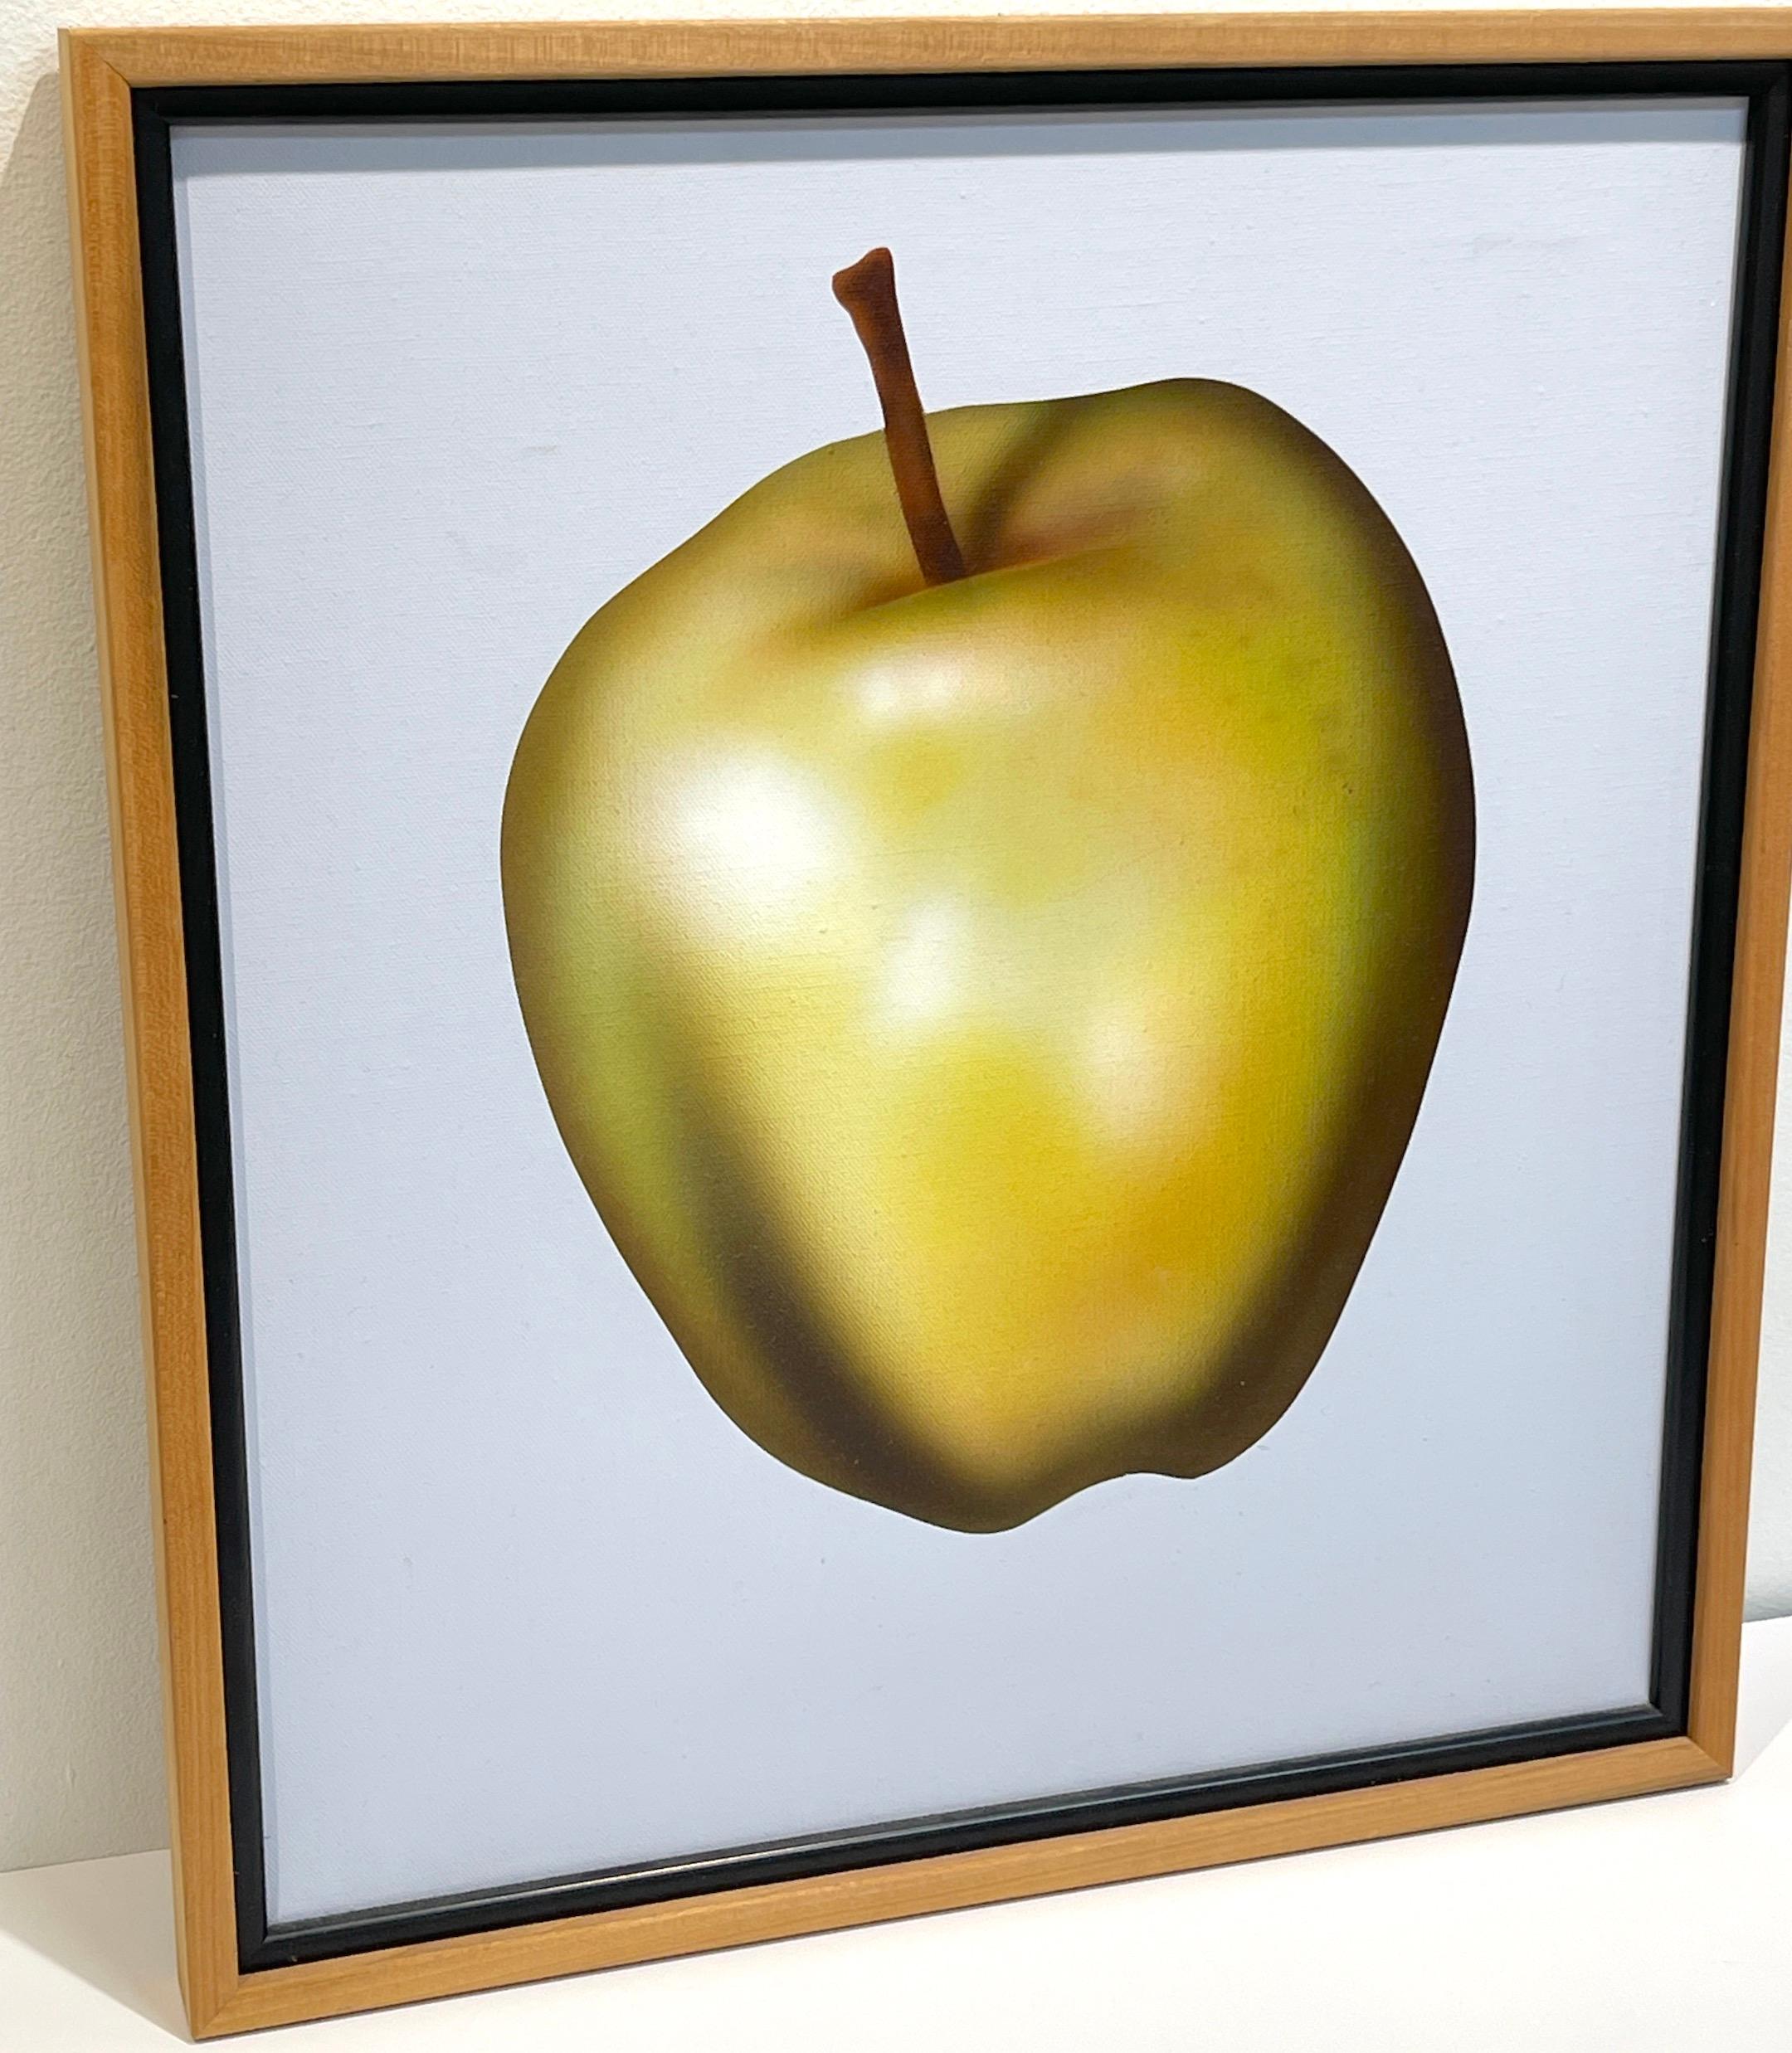 Clarence Measelle, (American, b. 1947) Green Apple, 1983 In Good Condition For Sale In West Palm Beach, FL